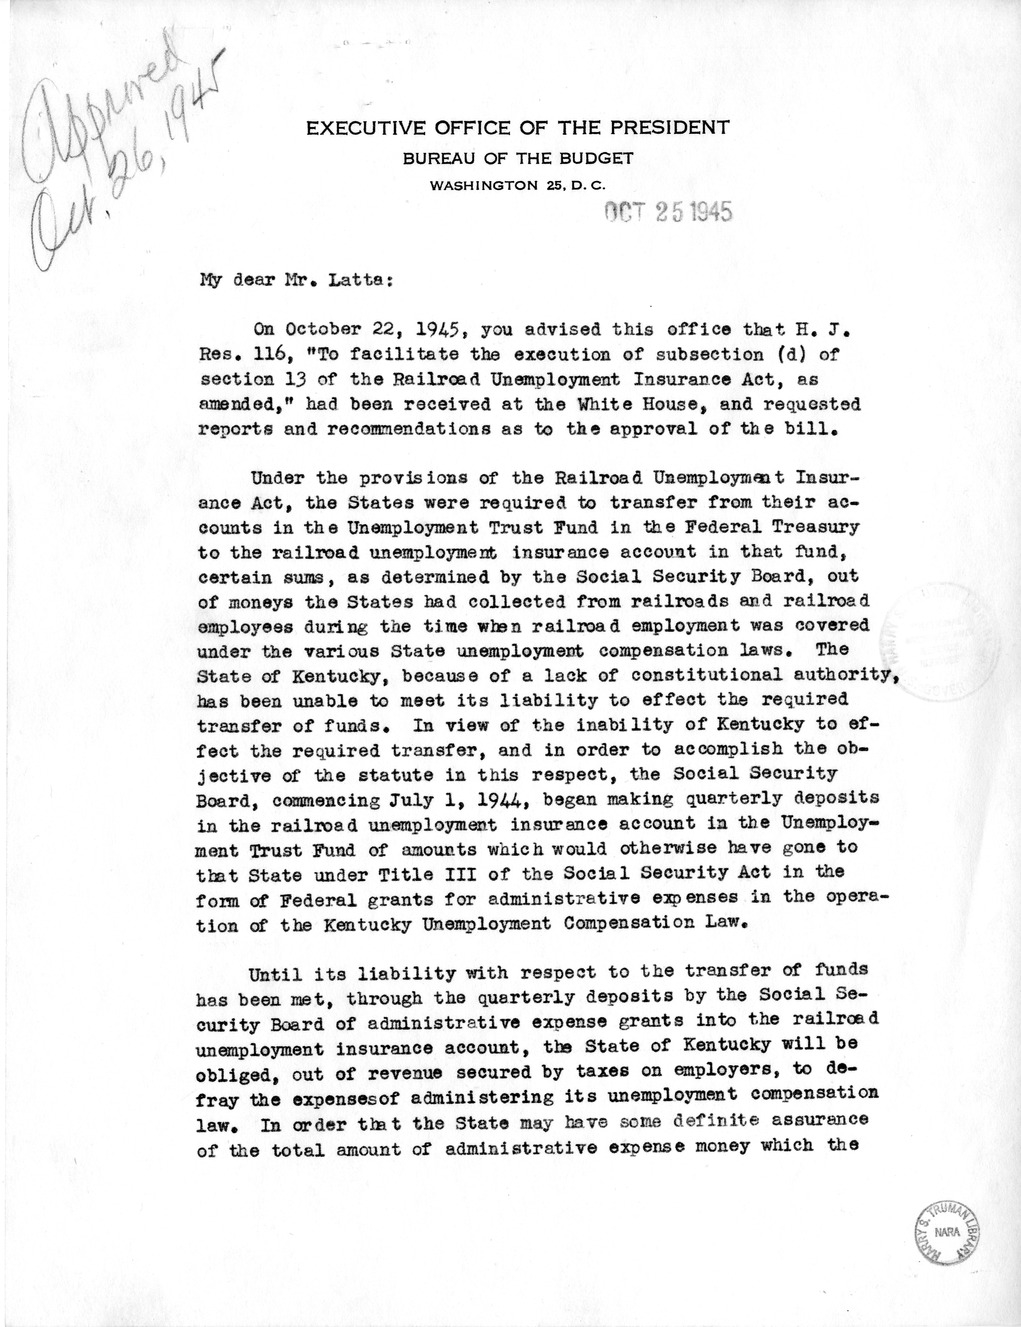 Memorandum from Paul H. Appleby to M. C. Latta, H.J. Res. 116, To Facilitate the Execution of Subsection (d) of Section 13 of the Railroad Unemployment Insurance Act, with Attachments